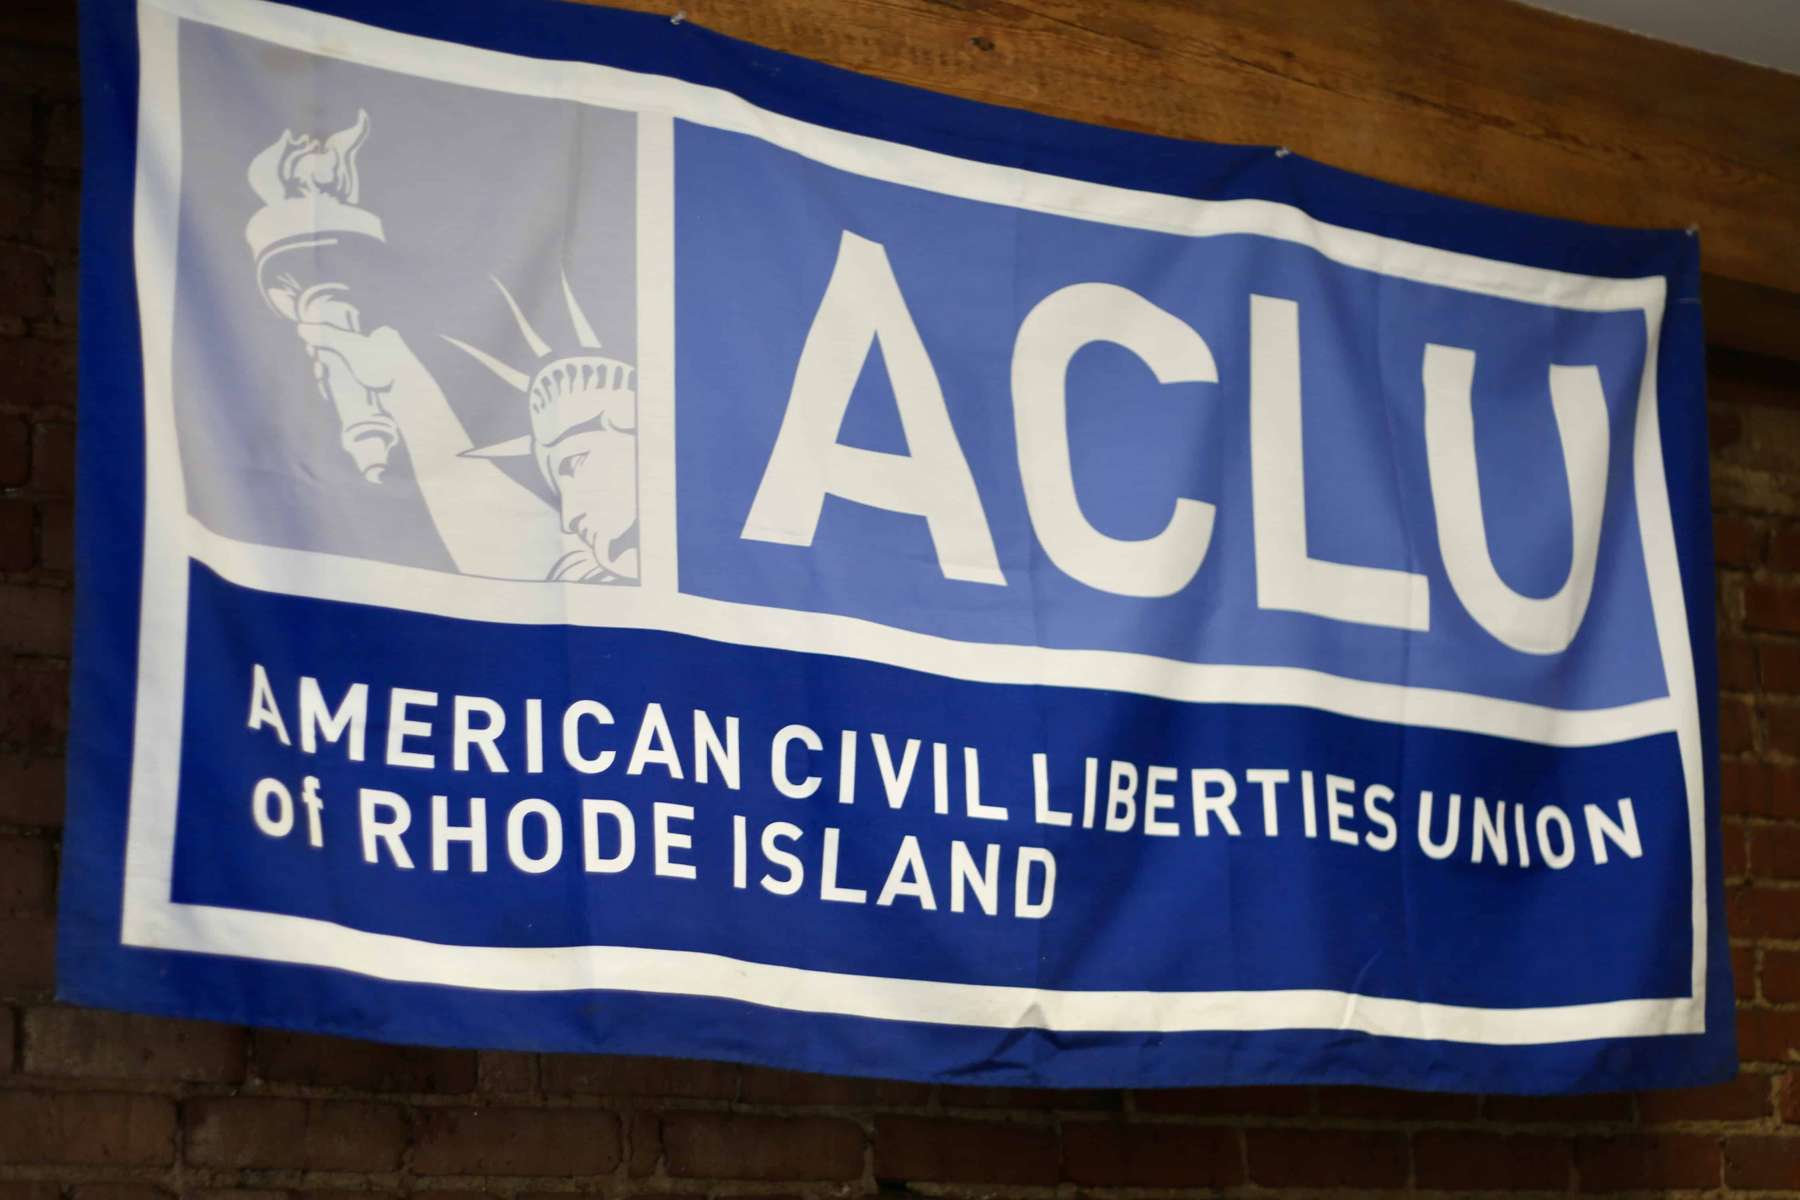 ACLU files brief challenging legality of lengthy solitary confinement at the ACI